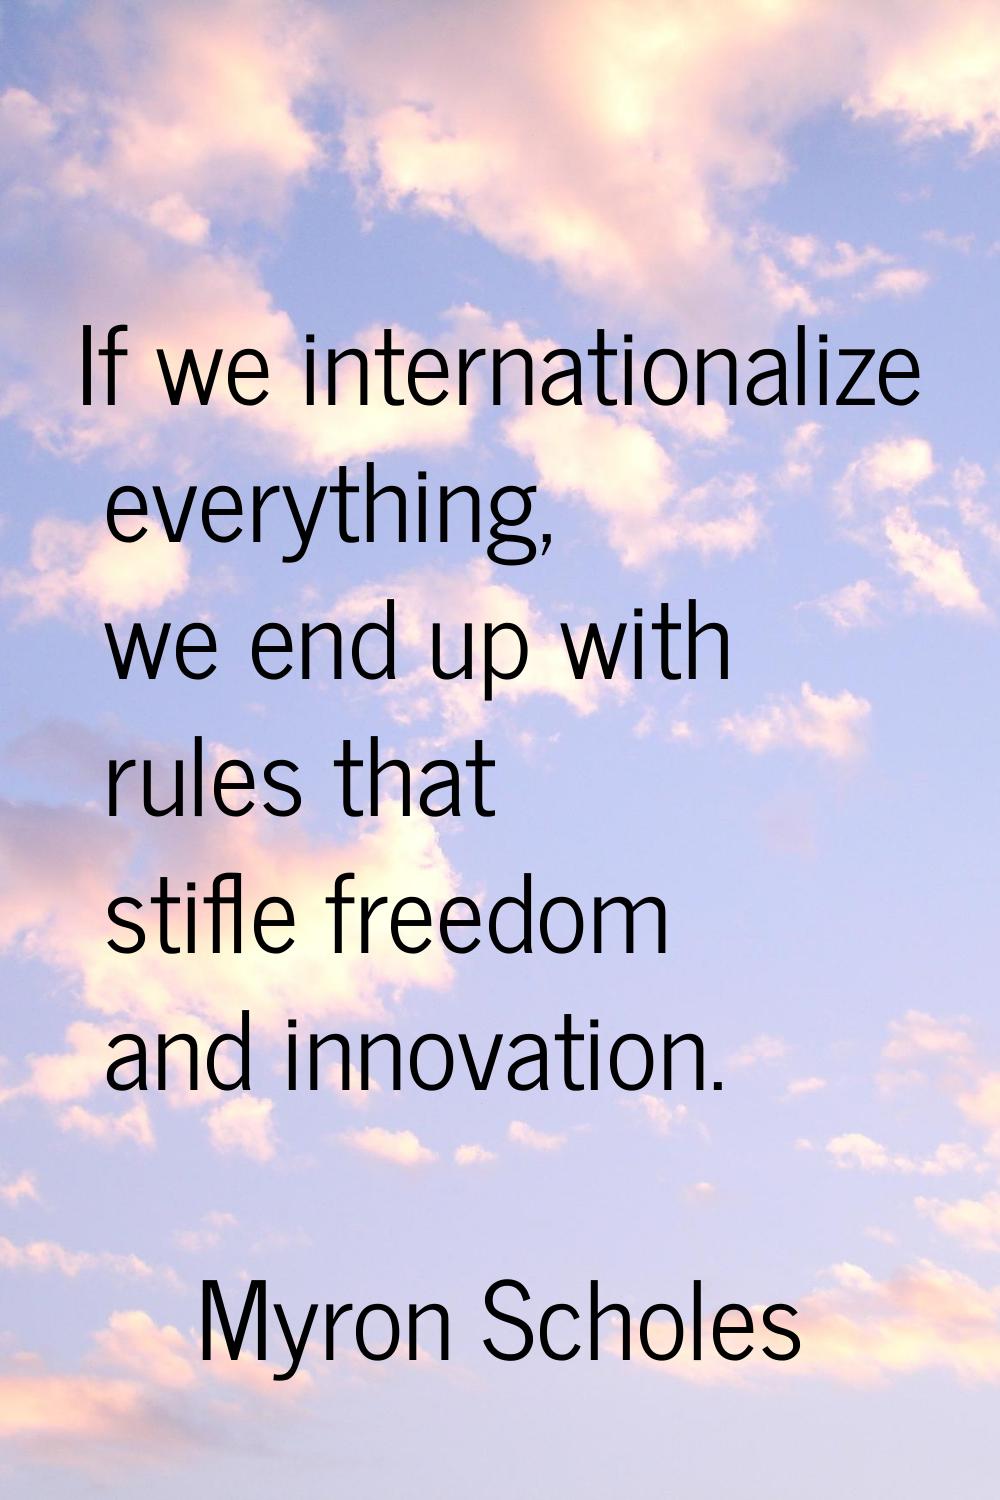 If we internationalize everything, we end up with rules that stifle freedom and innovation.